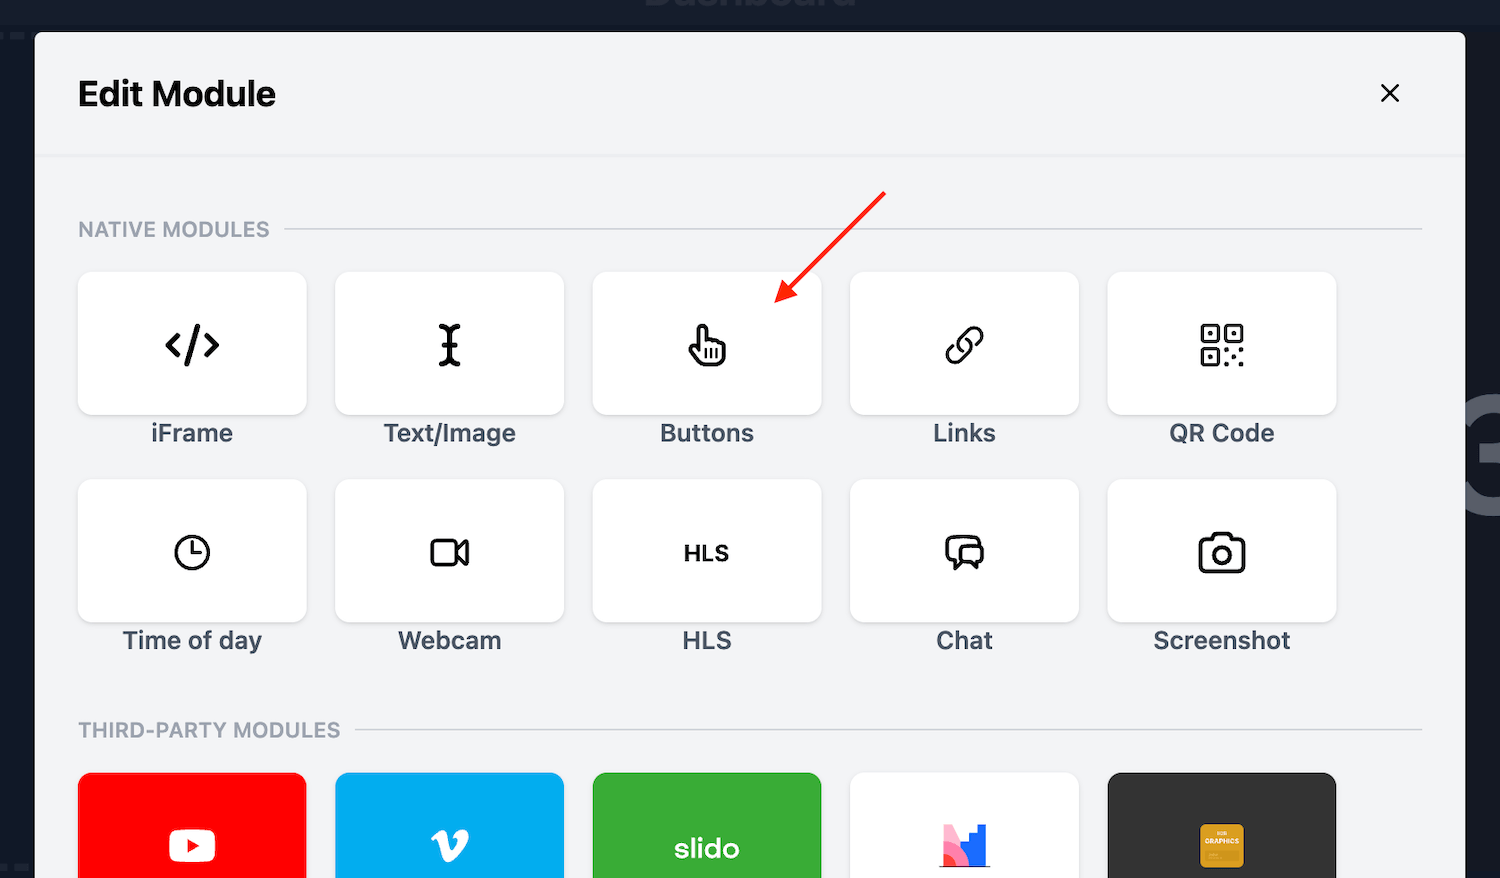 Adding the buttons module